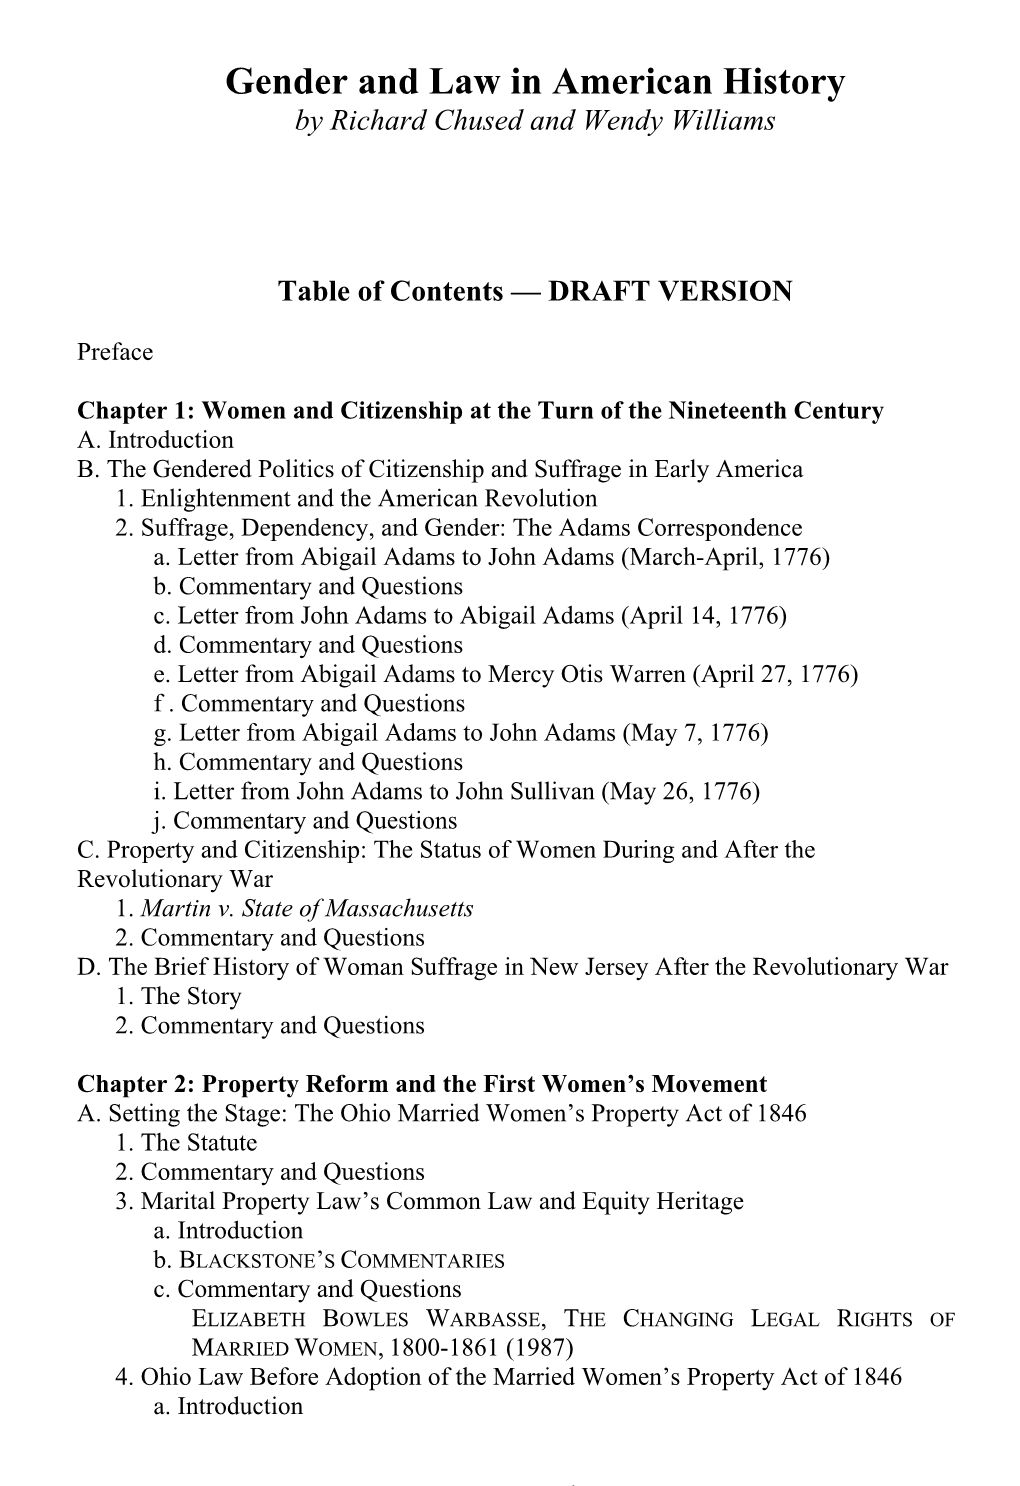 Gender and Law in American History by Richard Chused and Wendy Williams